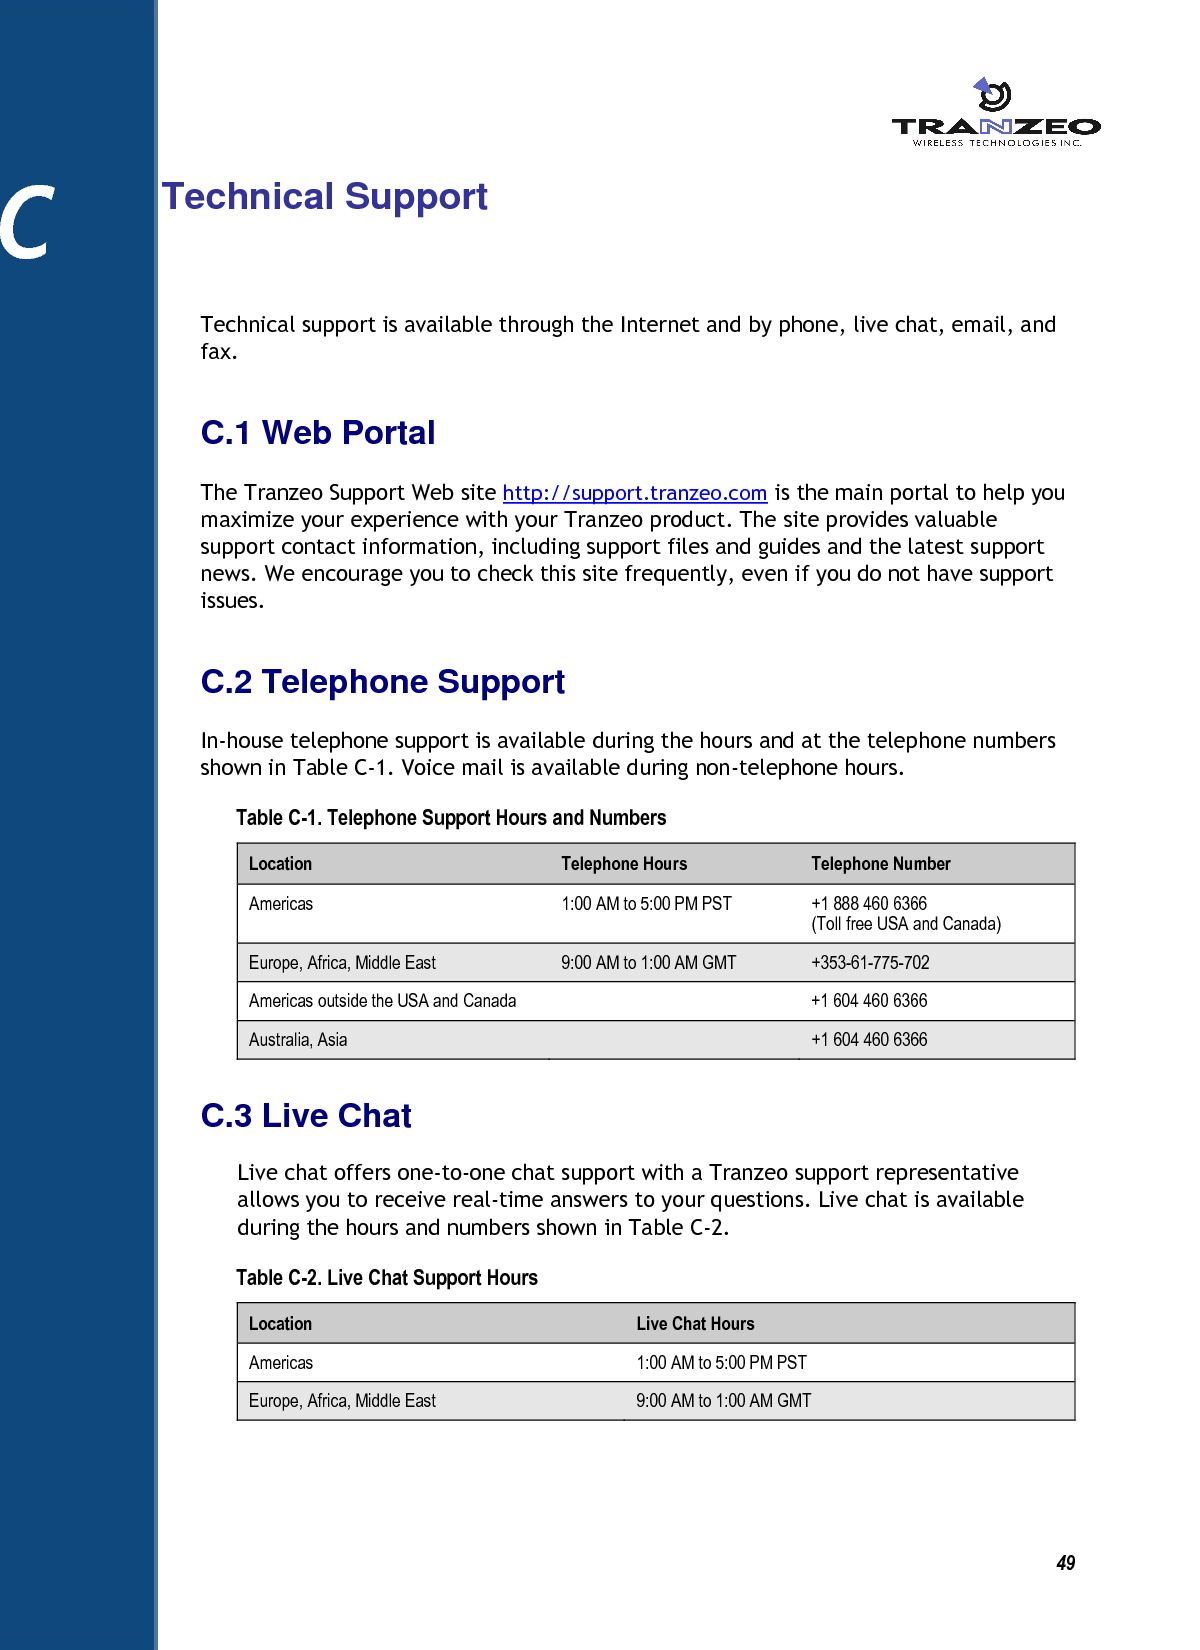          49 C    Technical Support Technical support is available through the Internet and by phone, live chat, email, and fax.  C.1 Web Portal The Tranzeo Support Web site http://support.tranzeo.com is the main portal to help you maximize your experience with your Tranzeo product. The site provides valuable support contact information, including support files and guides and the latest support news. We encourage you to check this site frequently, even if you do not have support issues. C.2 Telephone Support In-house telephone support is available during the hours and at the telephone numbers shown in Table C-1. Voice mail is available during non-telephone hours. Table C-1. Telephone Support Hours and Numbers Location  Telephone Hours  Telephone Number Americas  1:00 AM to 5:00 PM PST  +1 888 460 6366 (Toll free USA and Canada) Europe, Africa, Middle East  9:00 AM to 1:00 AM GMT  +353-61-775-702 Americas outside the USA and Canada    +1 604 460 6366 Australia, Asia    +1 604 460 6366 C.3 Live Chat Live chat offers one-to-one chat support with a Tranzeo support representative allows you to receive real-time answers to your questions. Live chat is available during the hours and numbers shown in Table C-2. Table C-2. Live Chat Support Hours Location  Live Chat Hours Americas  1:00 AM to 5:00 PM PST Europe, Africa, Middle East  9:00 AM to 1:00 AM GMT C 